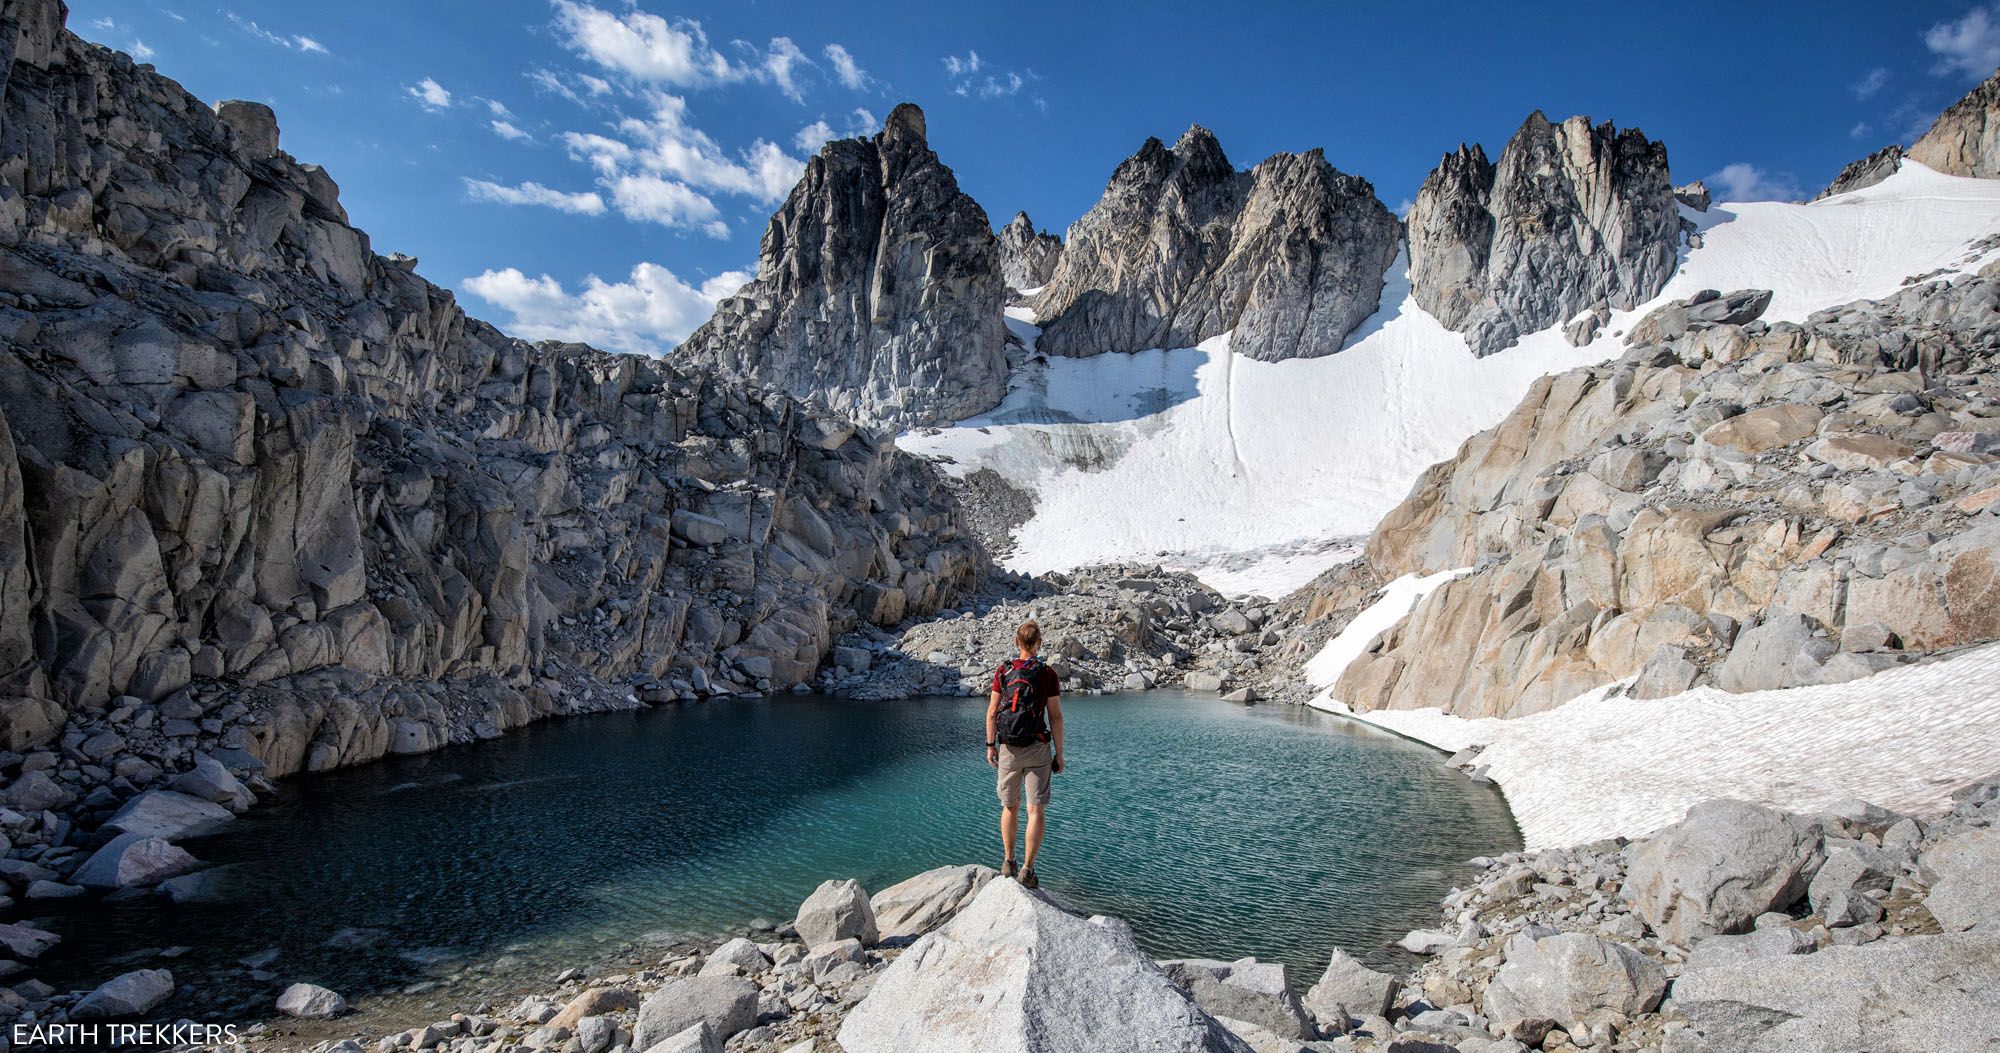 How to Hike the Enchantments